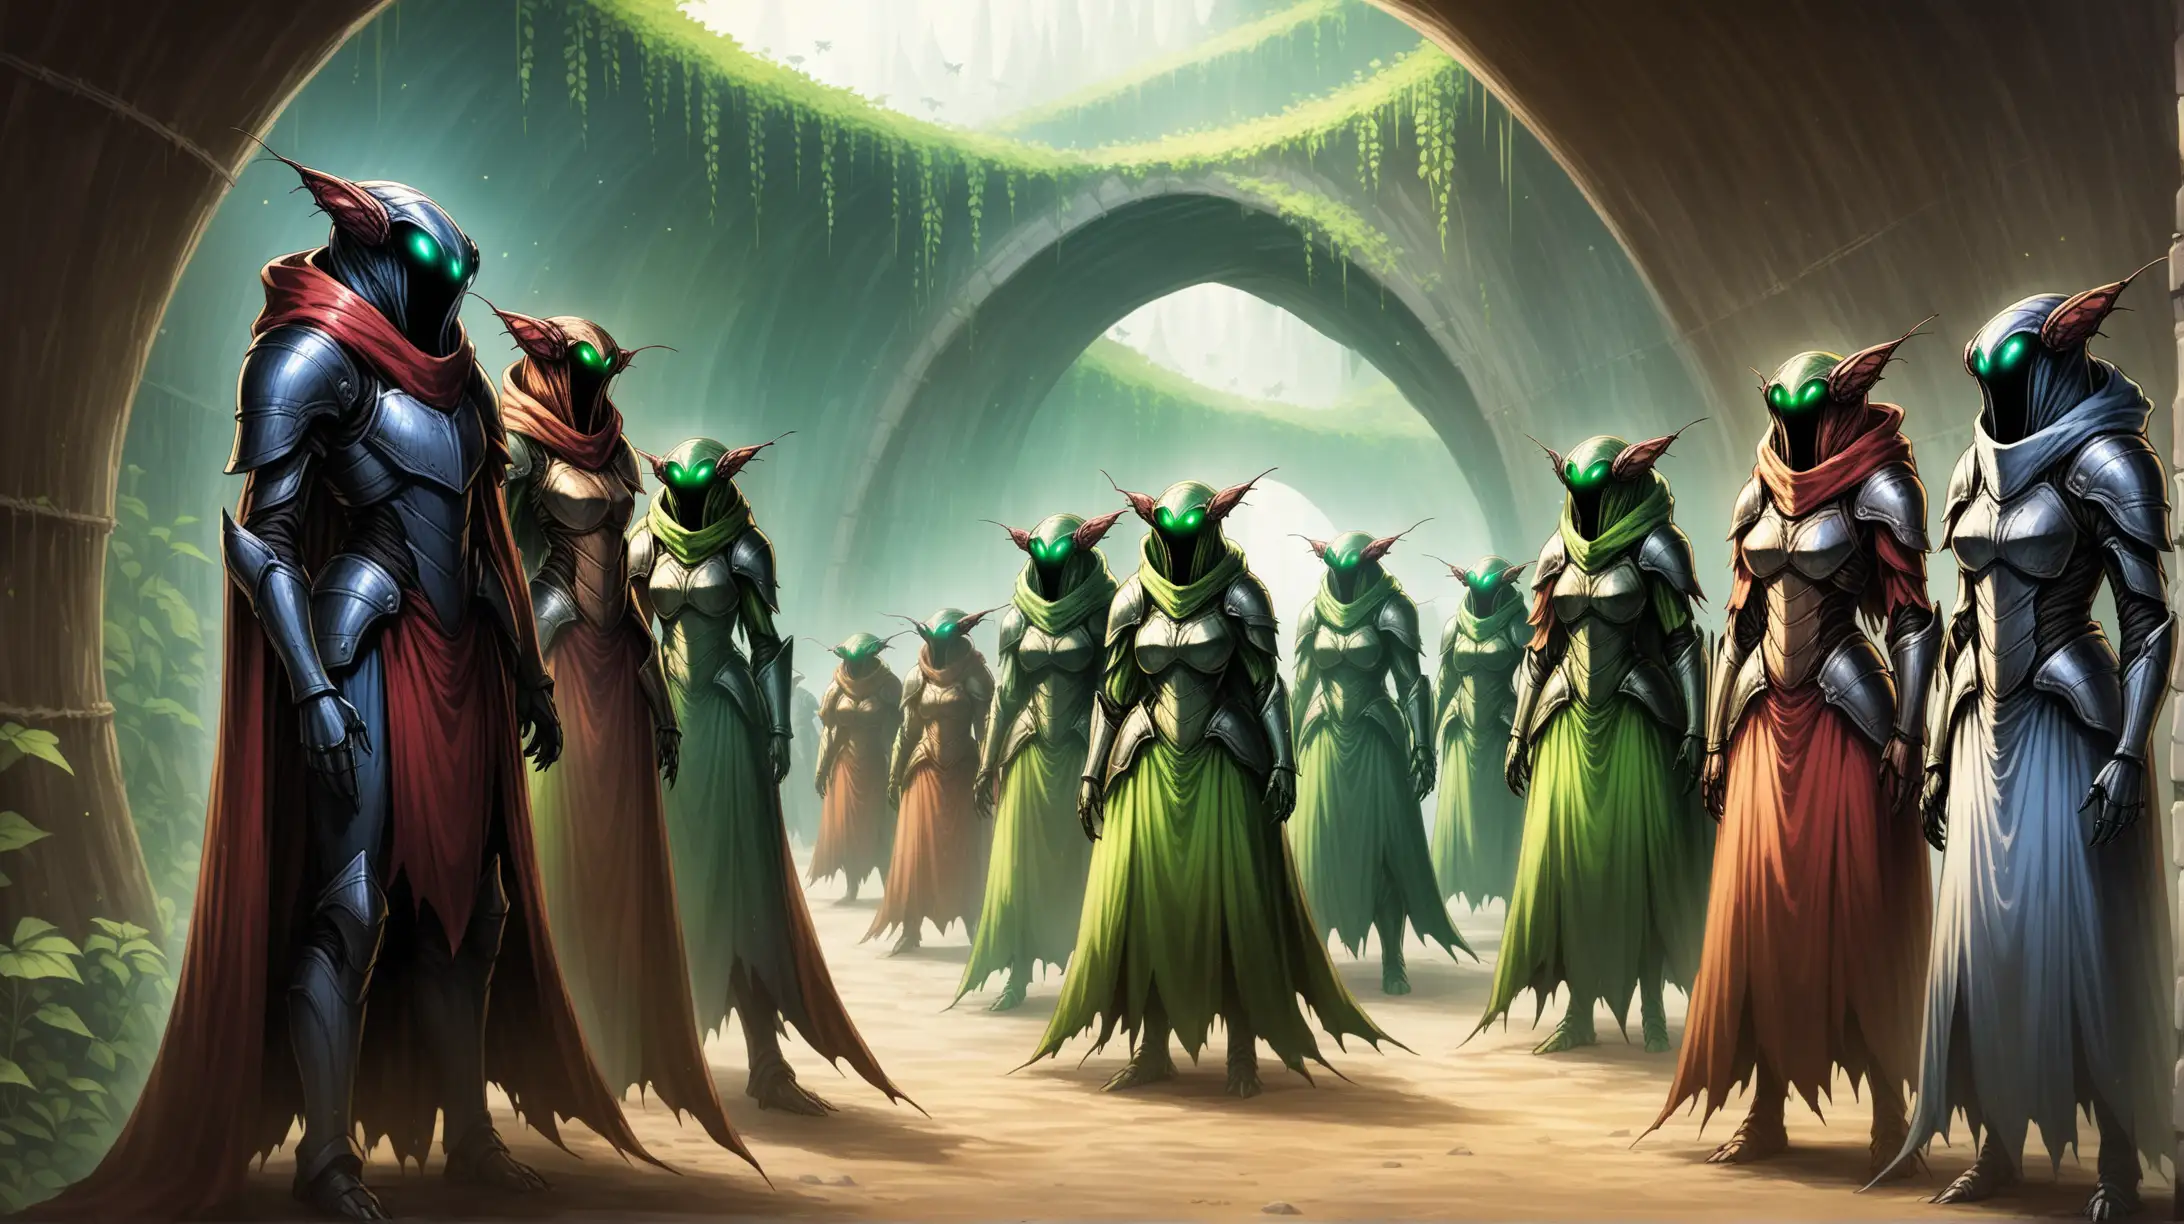 group of insectoid people, many colors, male and female, armors and robes, colony tunnels, Medieval fantasy